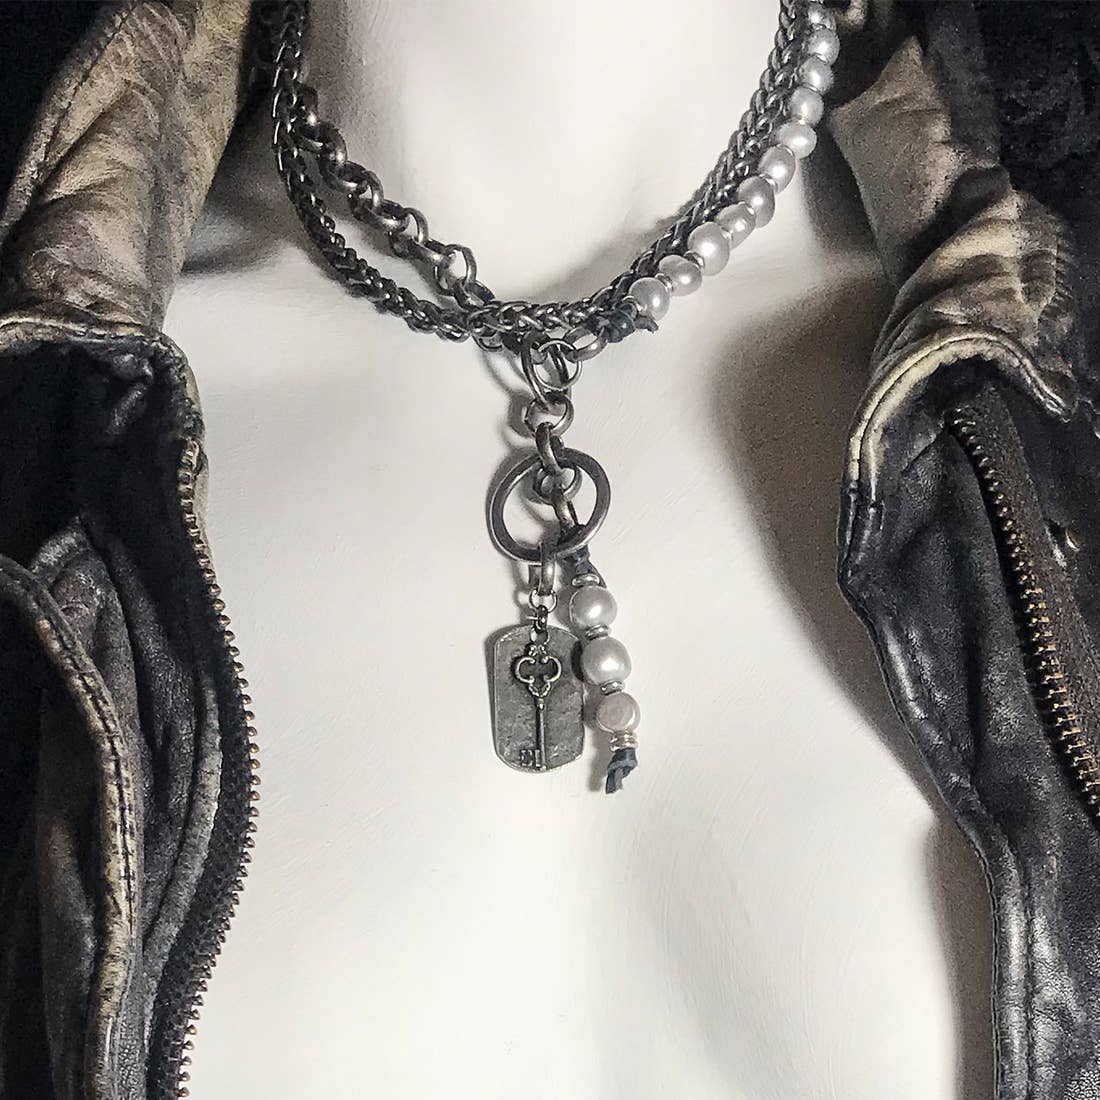 COCO Baroque Pearls Mixed Metals Opera Necklace or Choker - Gunmetal with Pewter Heart Tassel